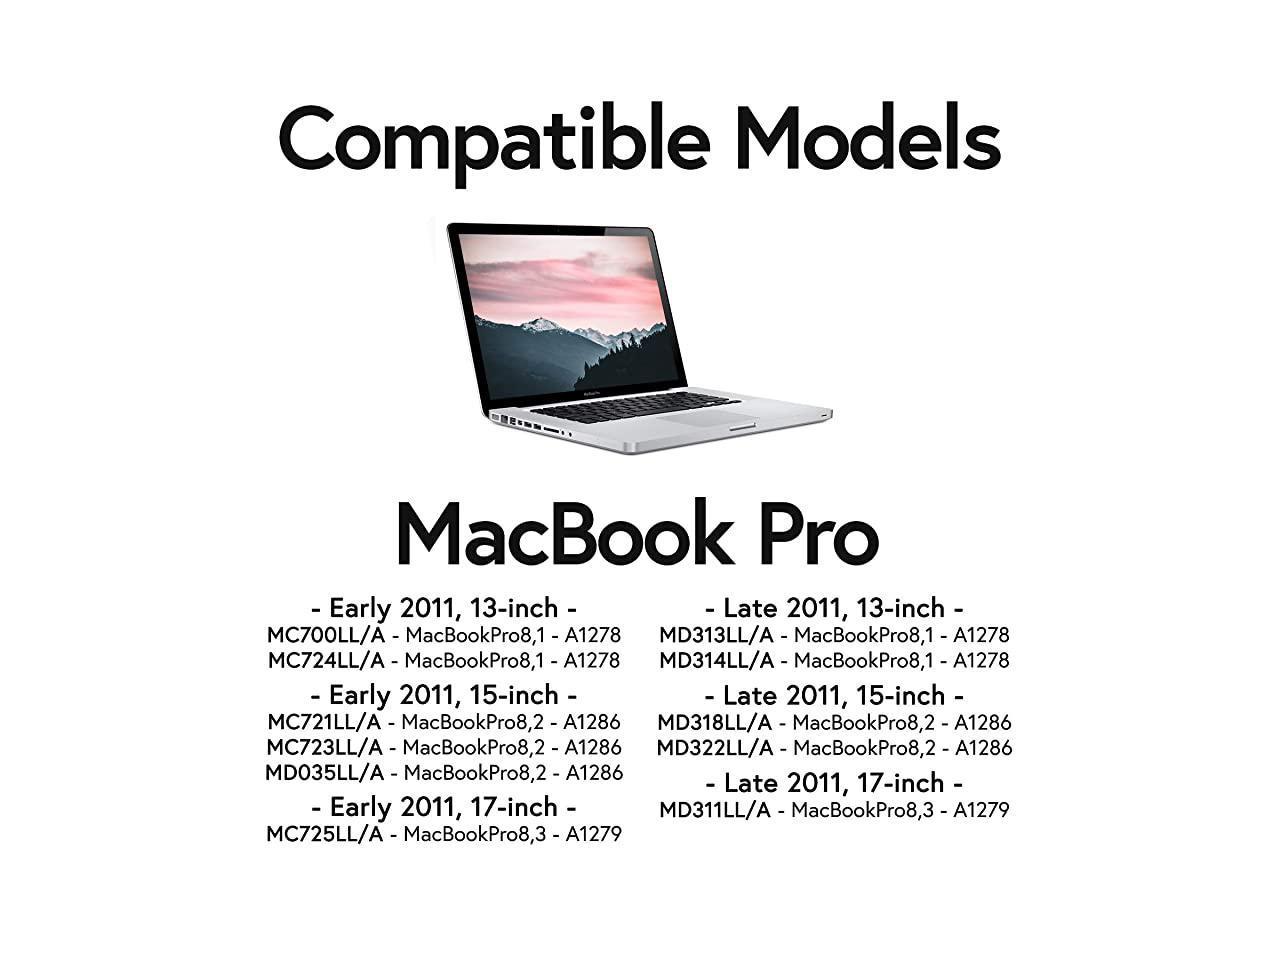 ram memory for macbook pro early 2011